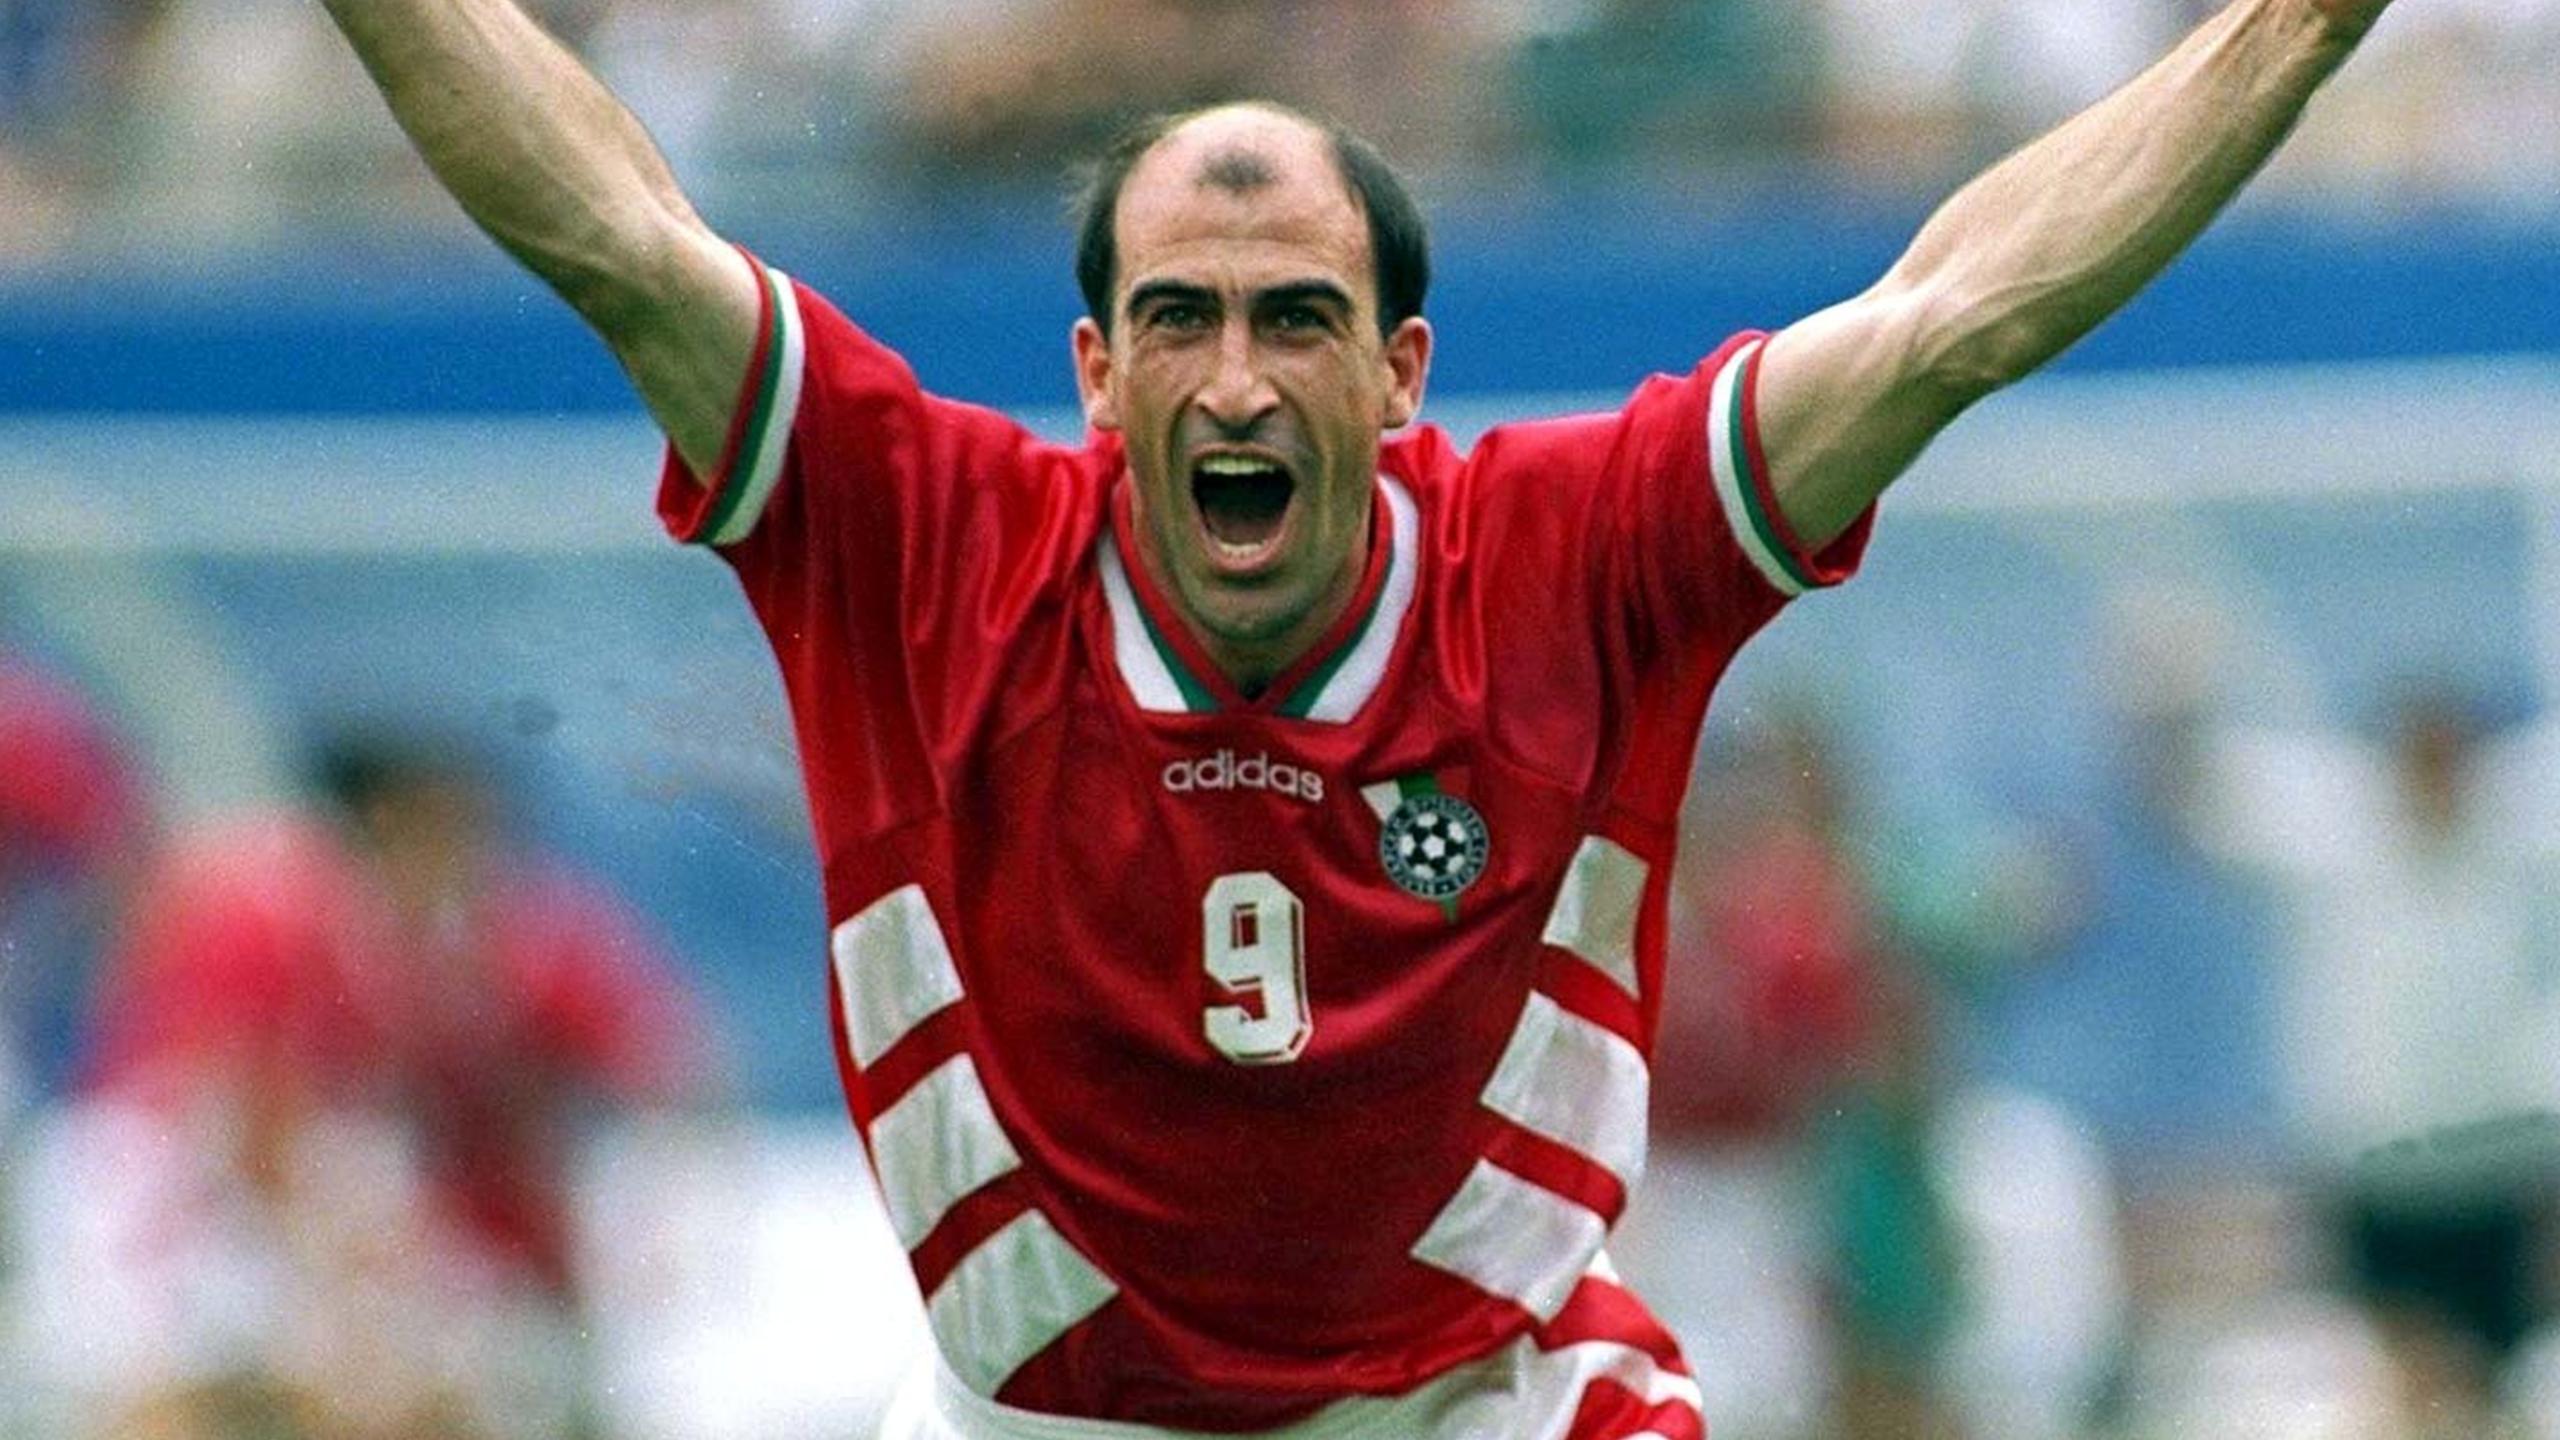 During World Cup 1994, the incumbent World Champions Germany were eliminated by a header by Bulgarian midfielder Yordan Letchkov